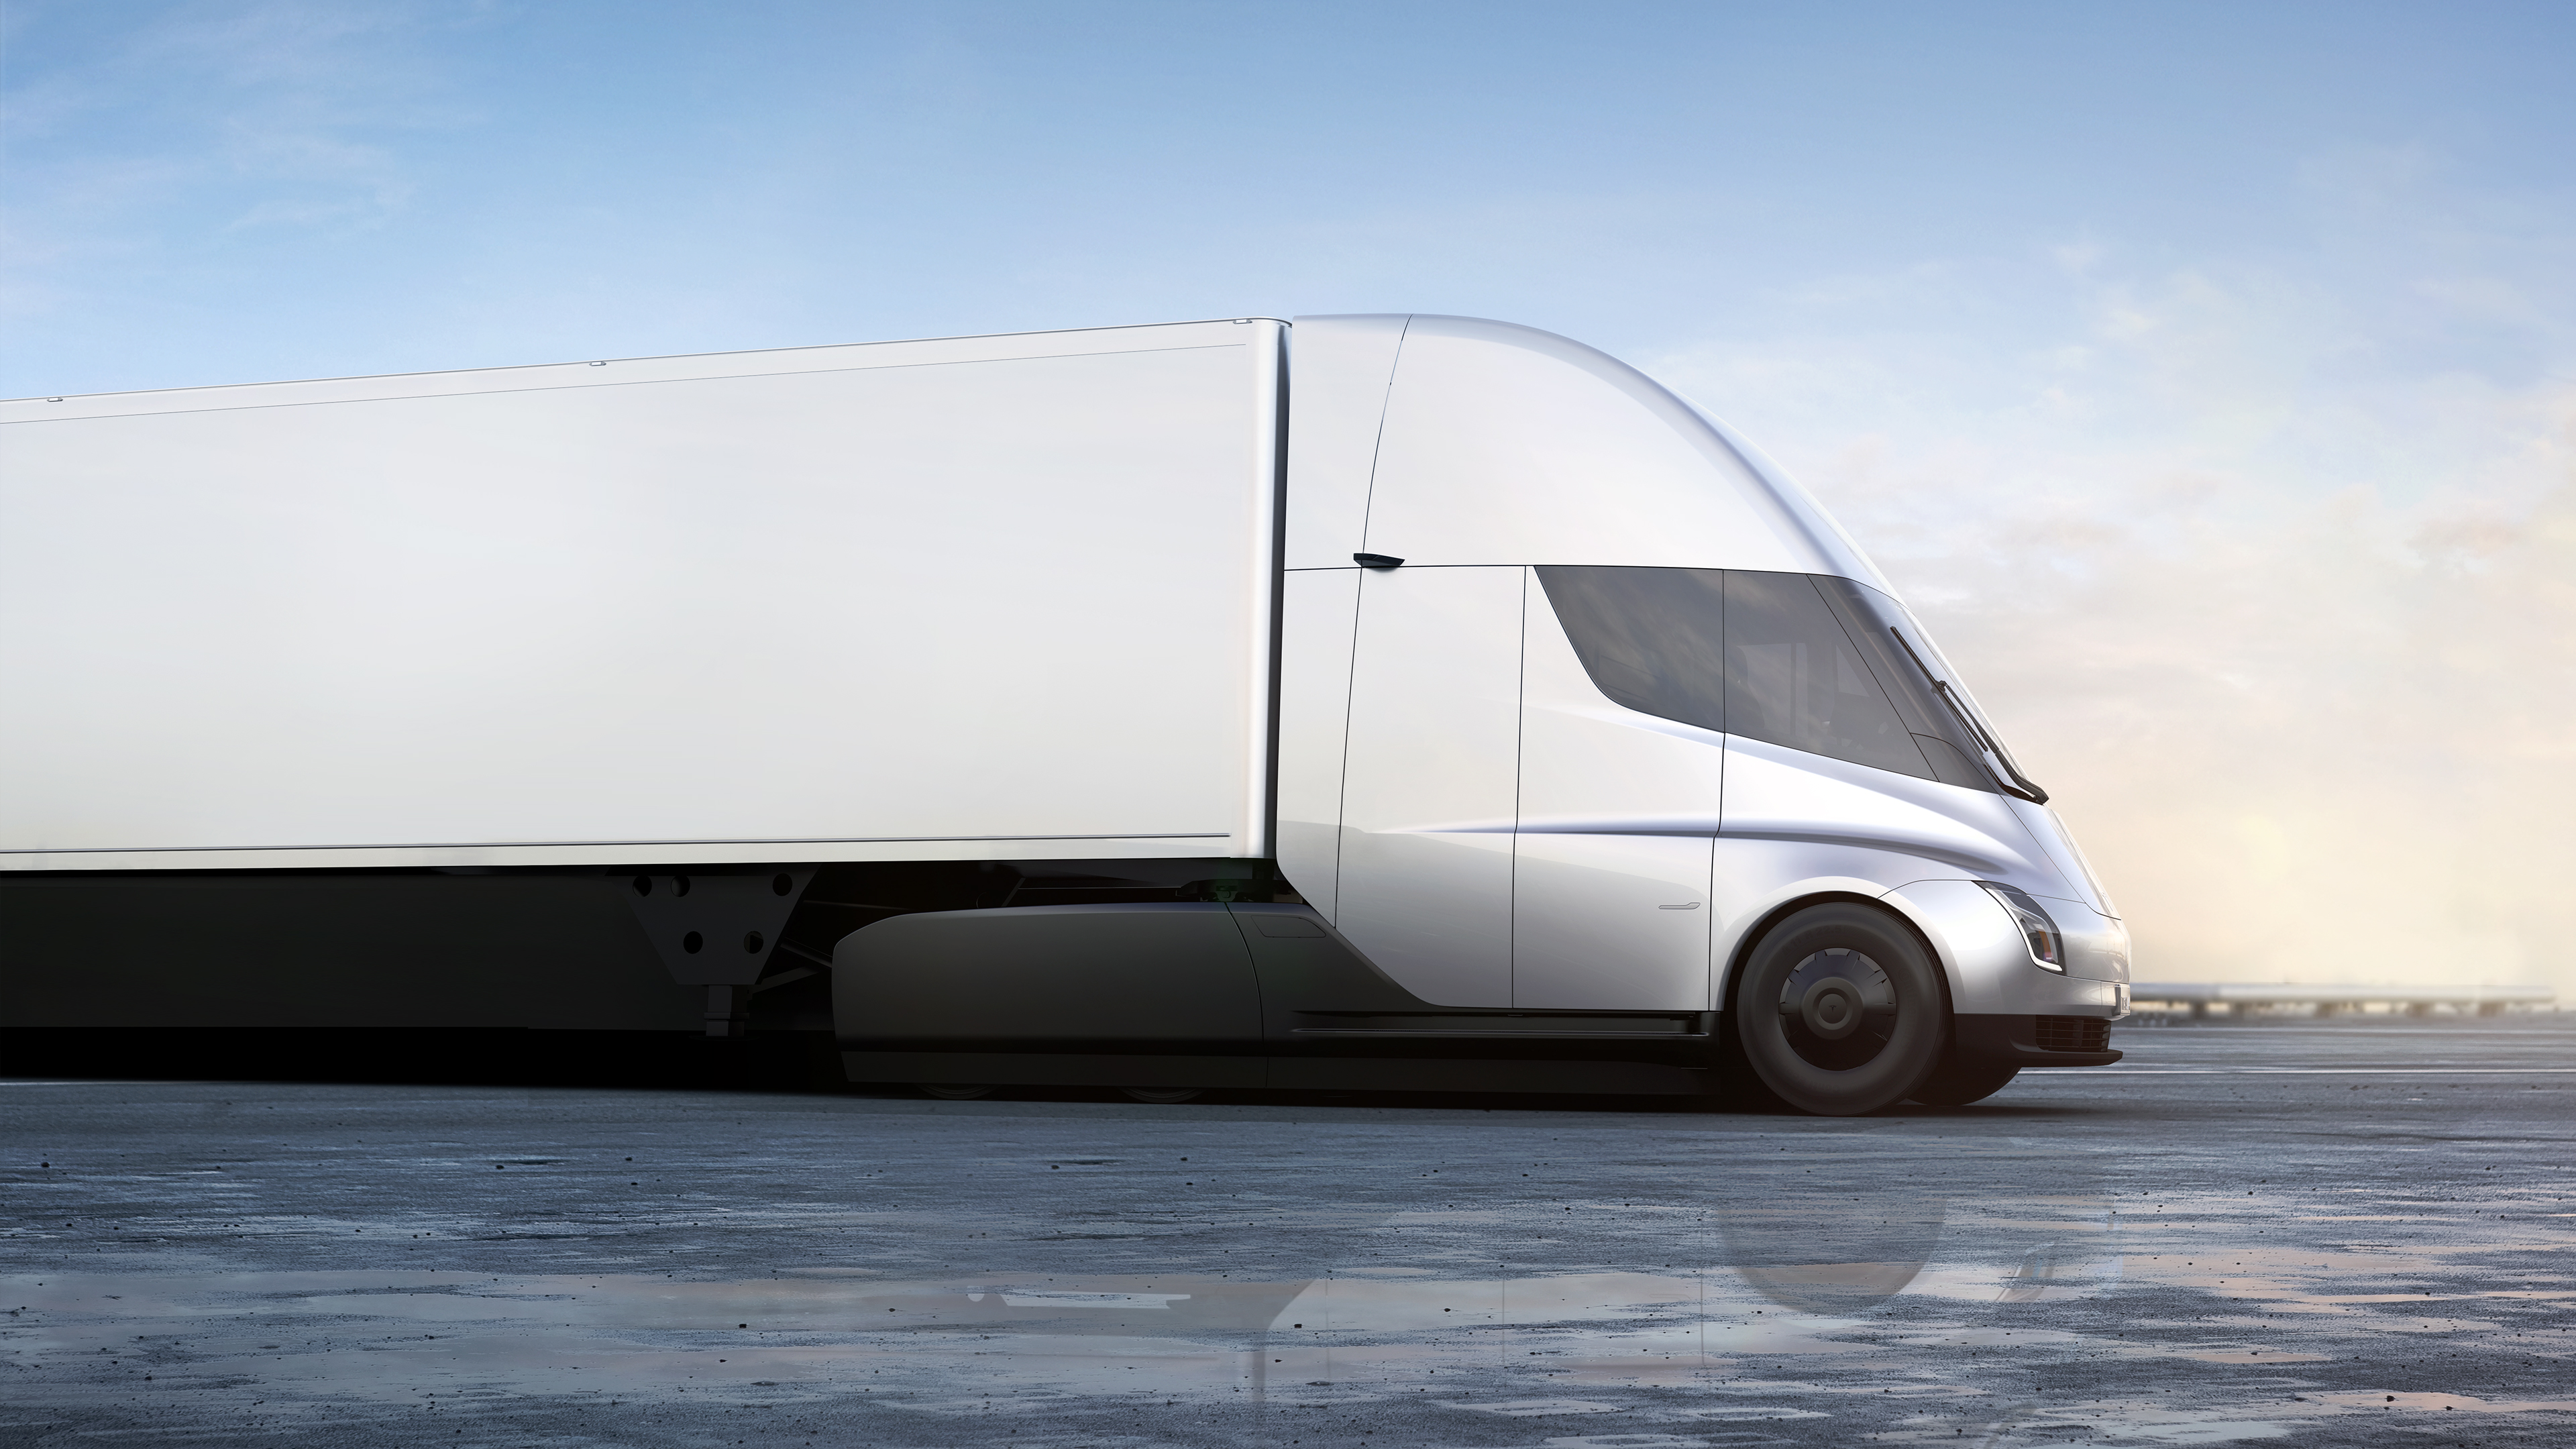 Tesla Truck An Look Inside The New Electric Semi Fortune